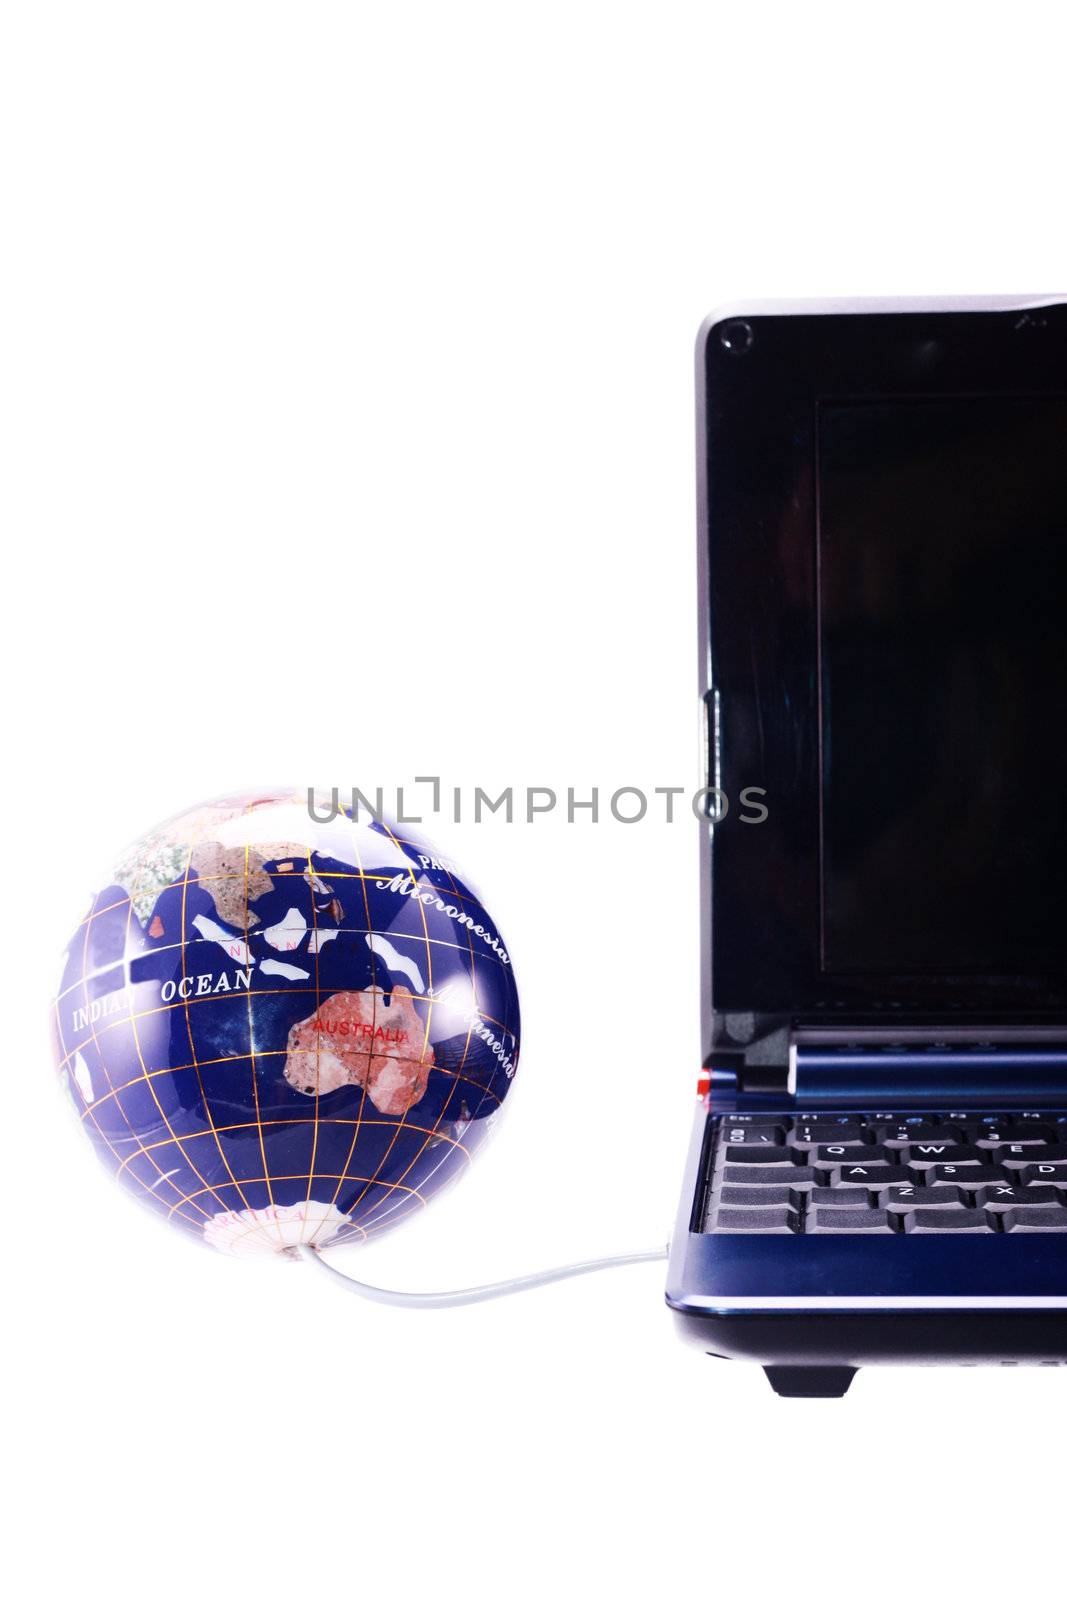 Computer and globe render The World at Your Fingertips concept by dacasdo